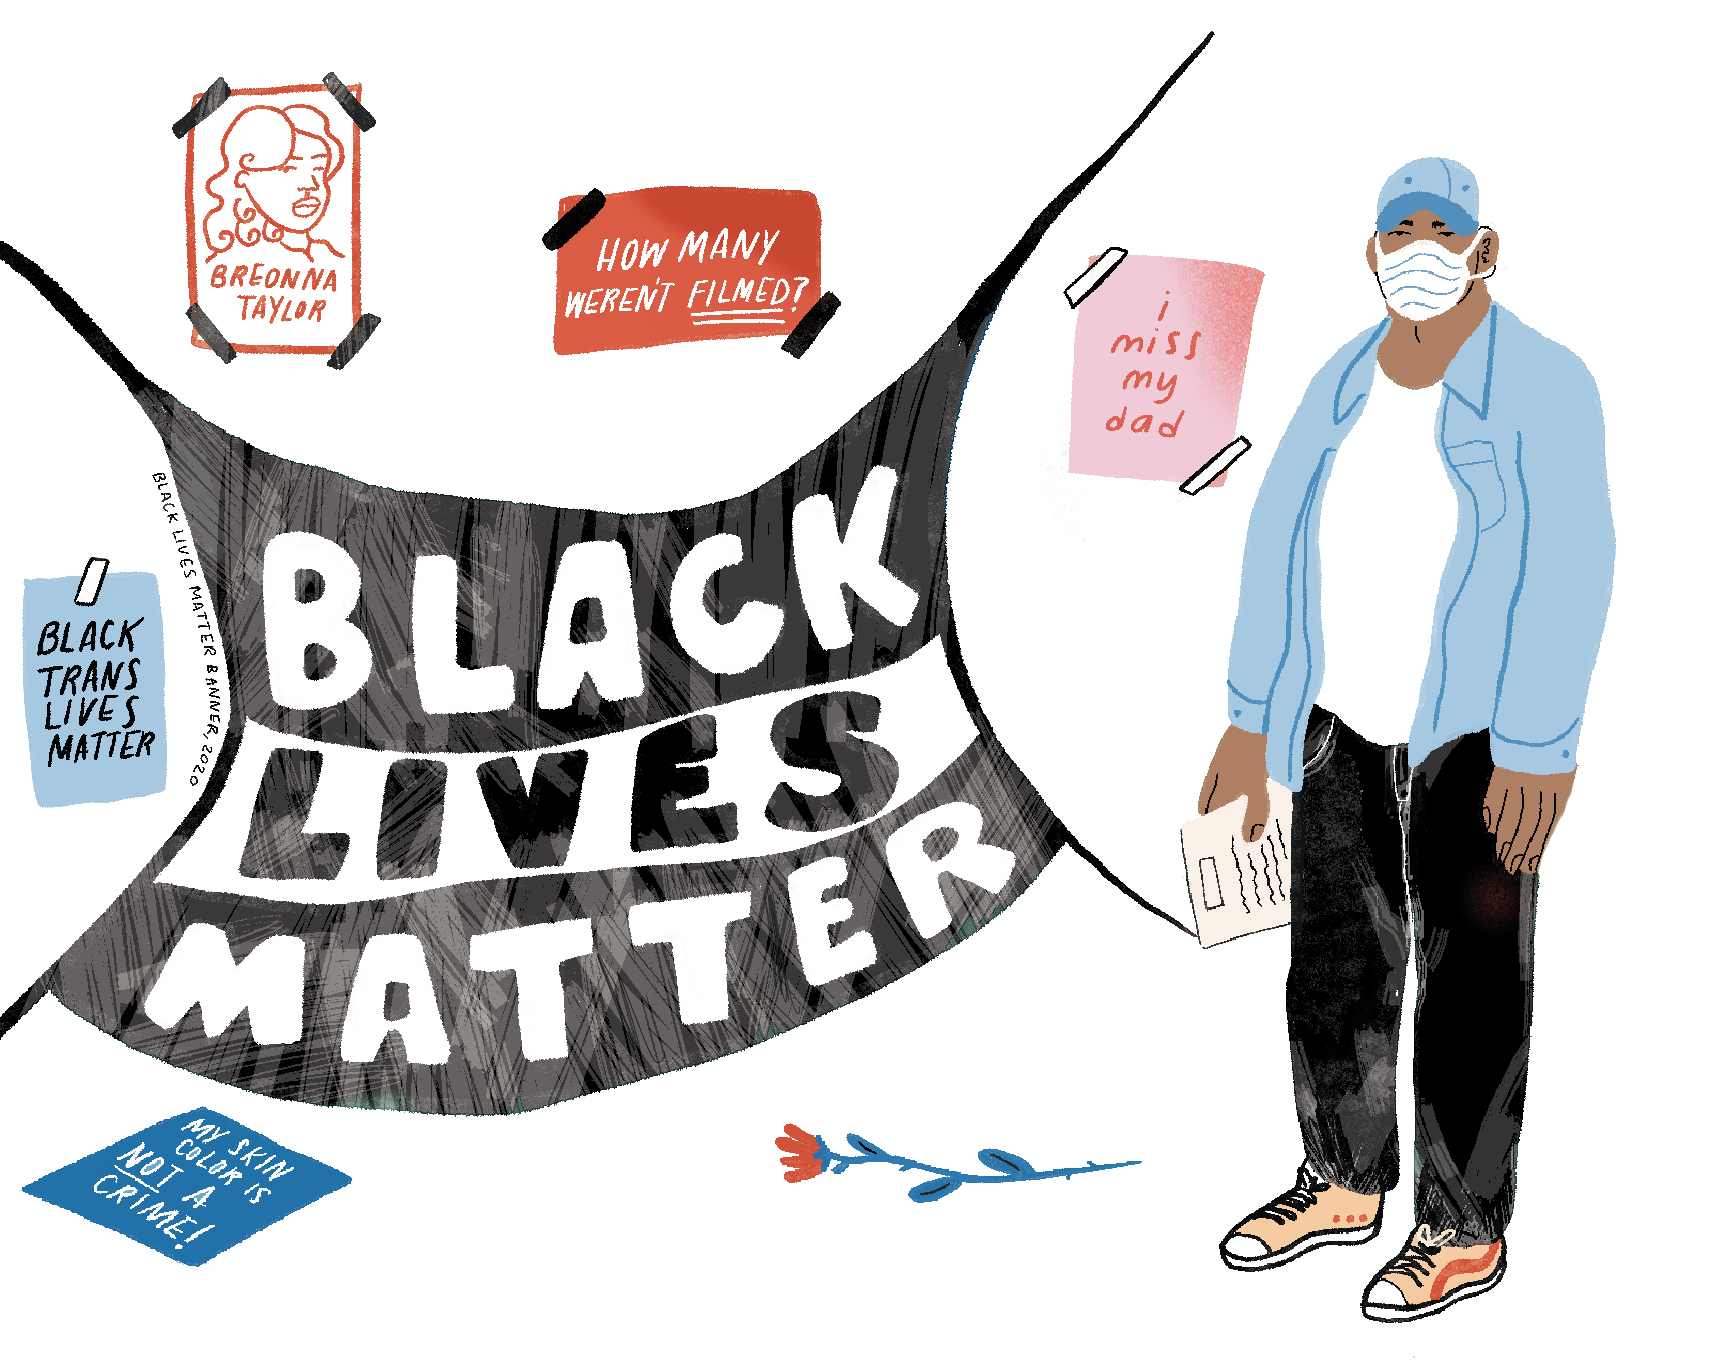 Black Lives matter banner surrounded by other protest posters